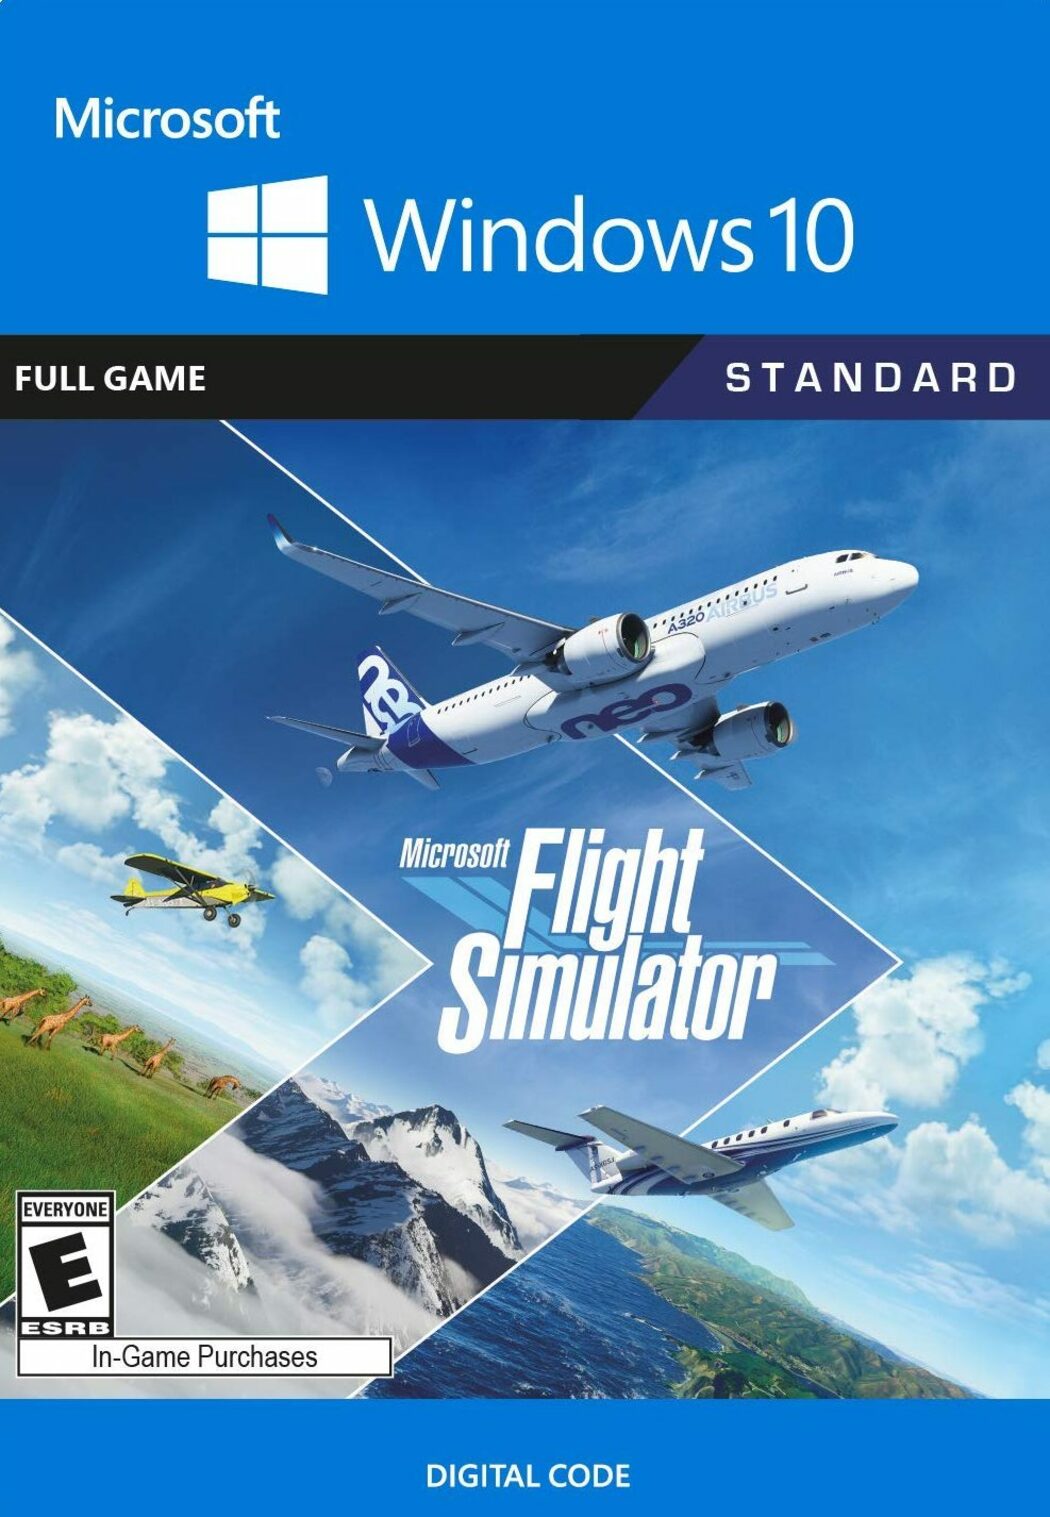 how many discs are in the fsx gold edition box